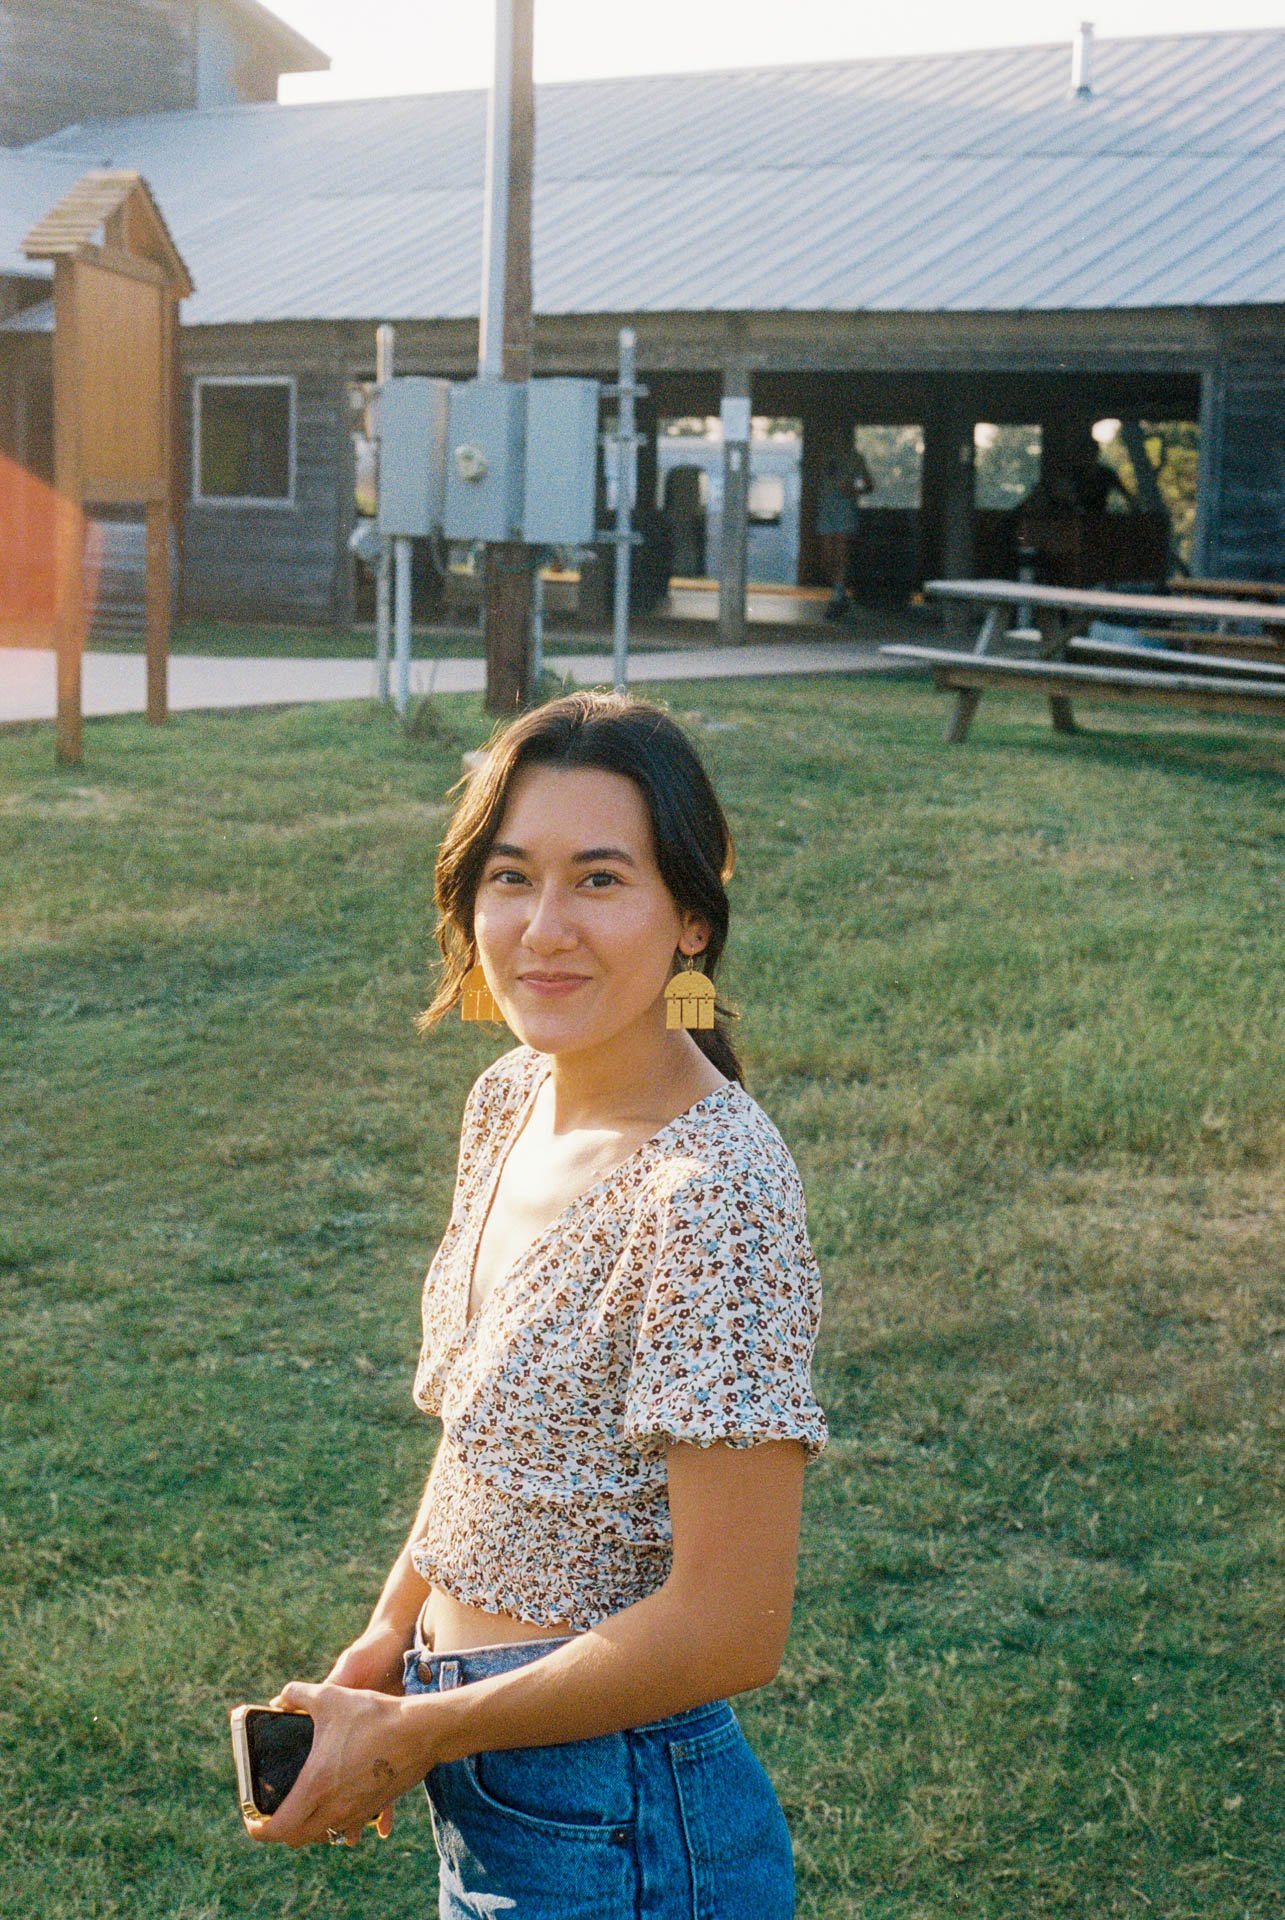 Jules-Acree-at-Jester-King-Brewing-in-Texas-on-Film-1.jpg